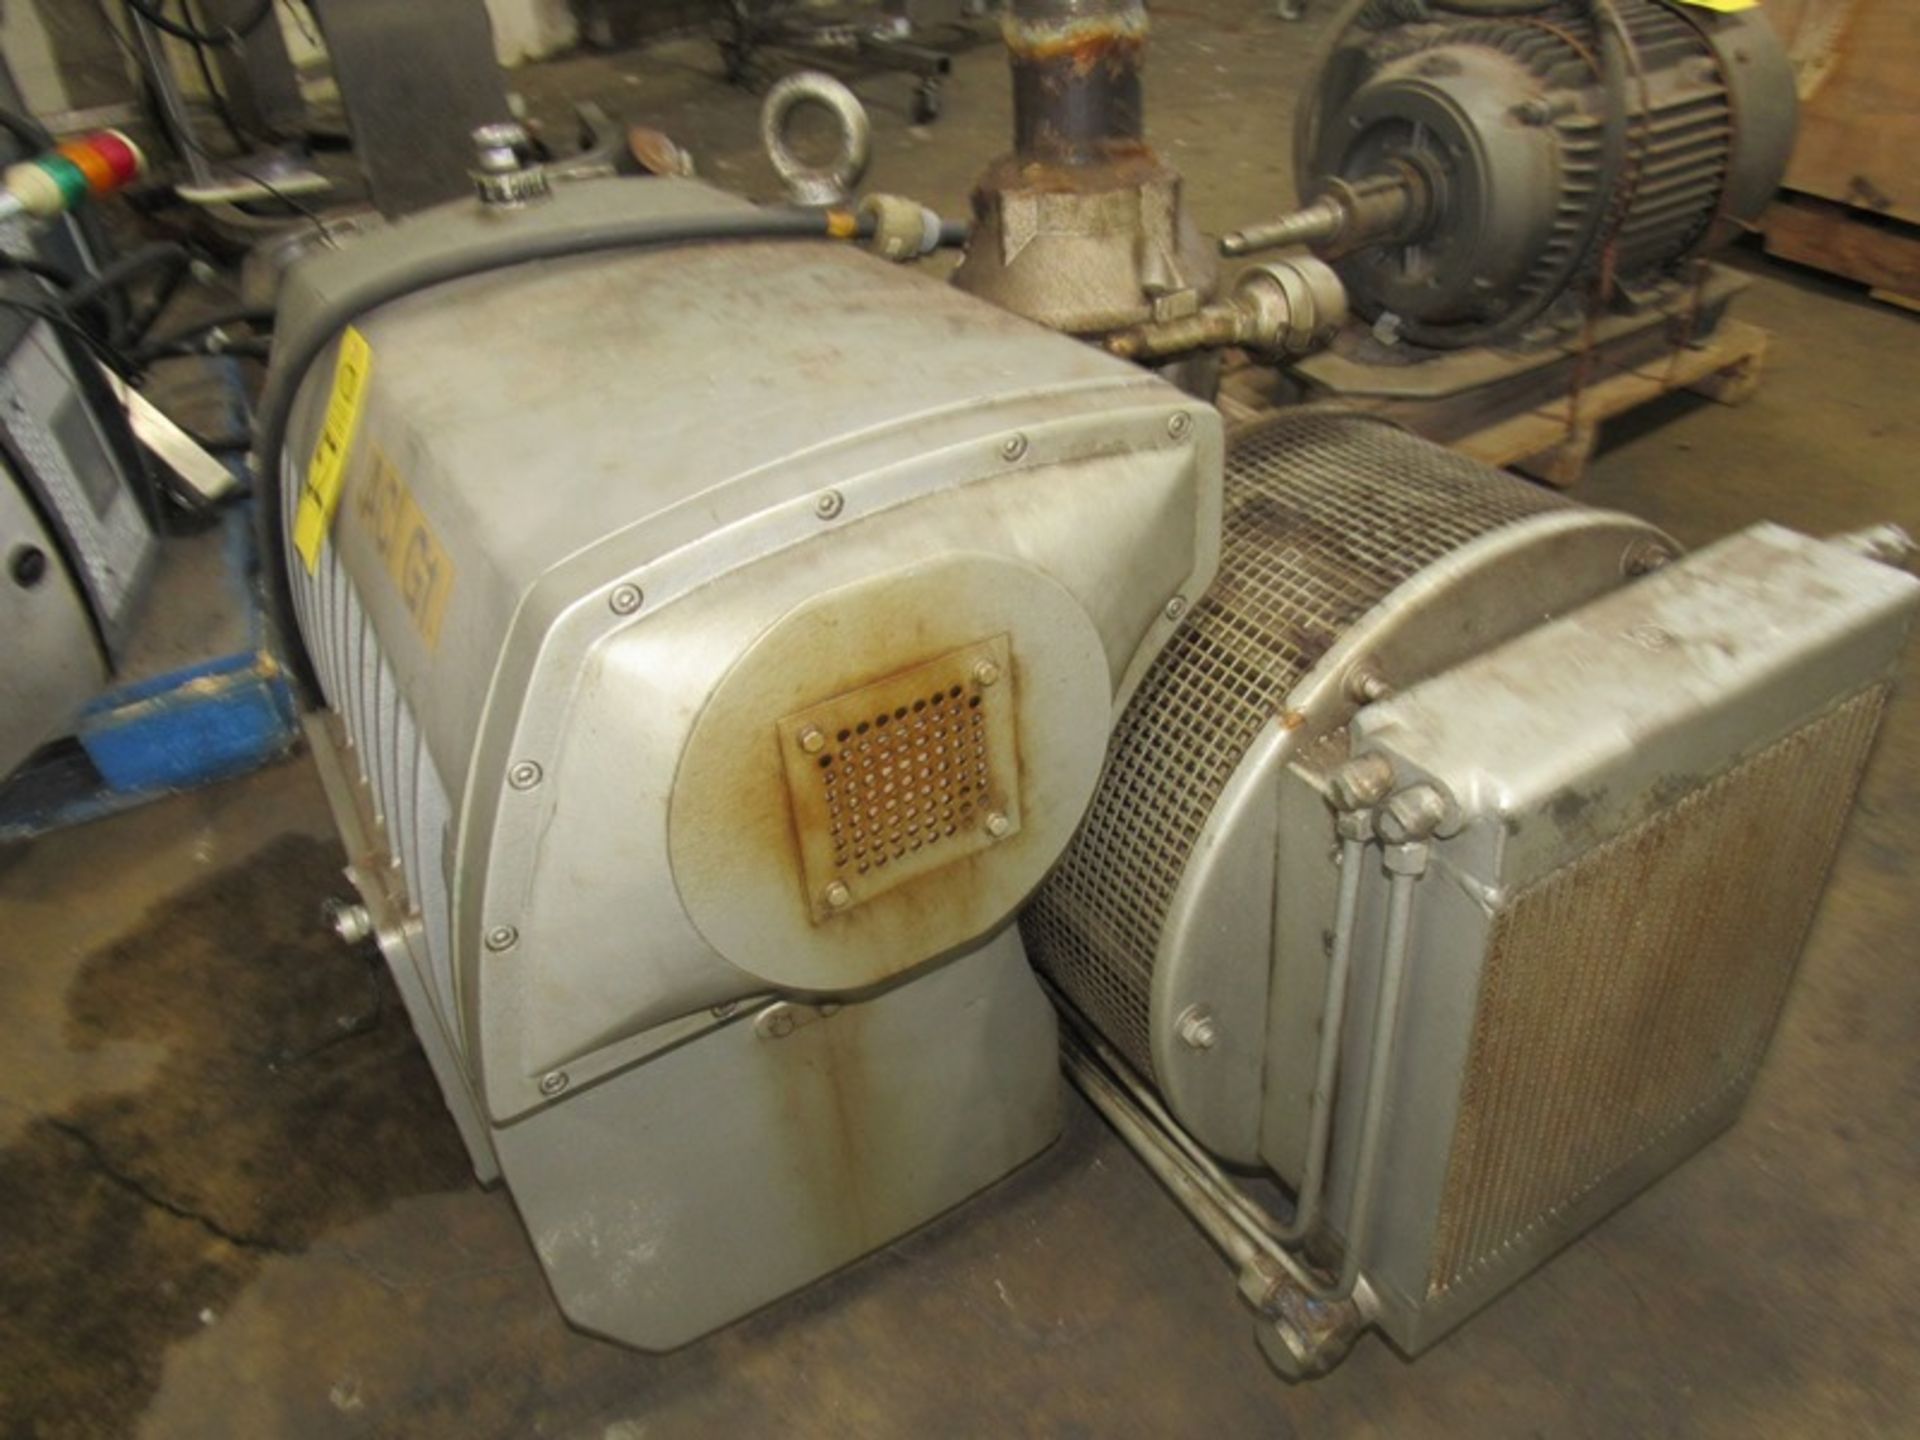 Busch Vacuum Pump with motor (maybe 630), Located in Plano, Illinois (Equipment must be removed by